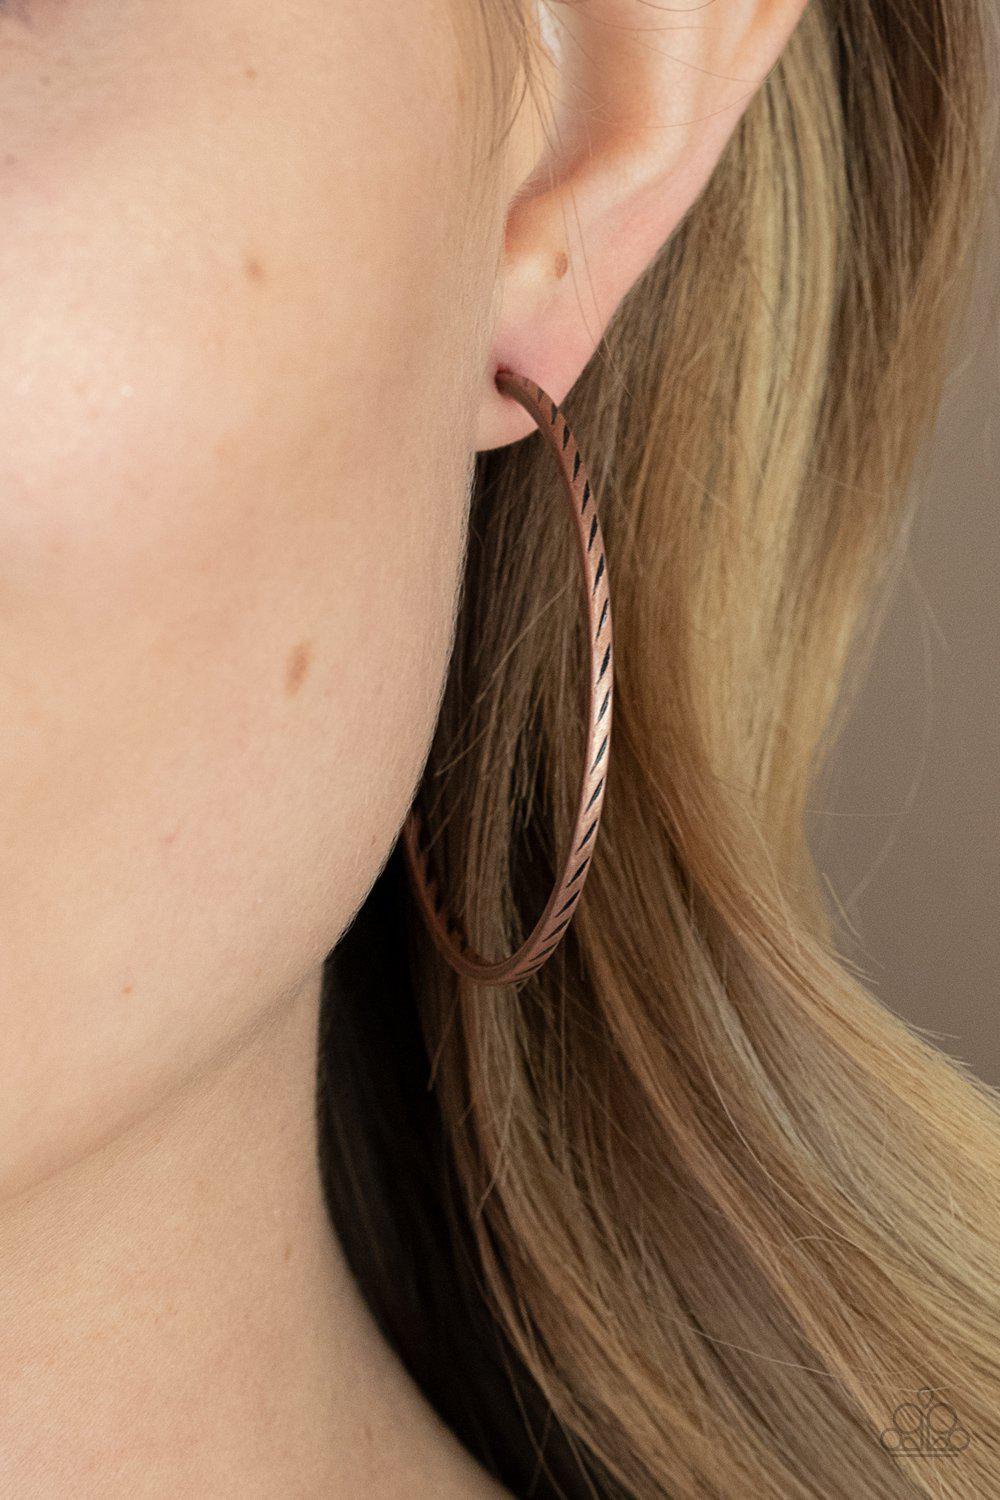 Rural Reserve Copper Hoop Earrings - Paparazzi Accessories- model - CarasShop.com - $5 Jewelry by Cara Jewels